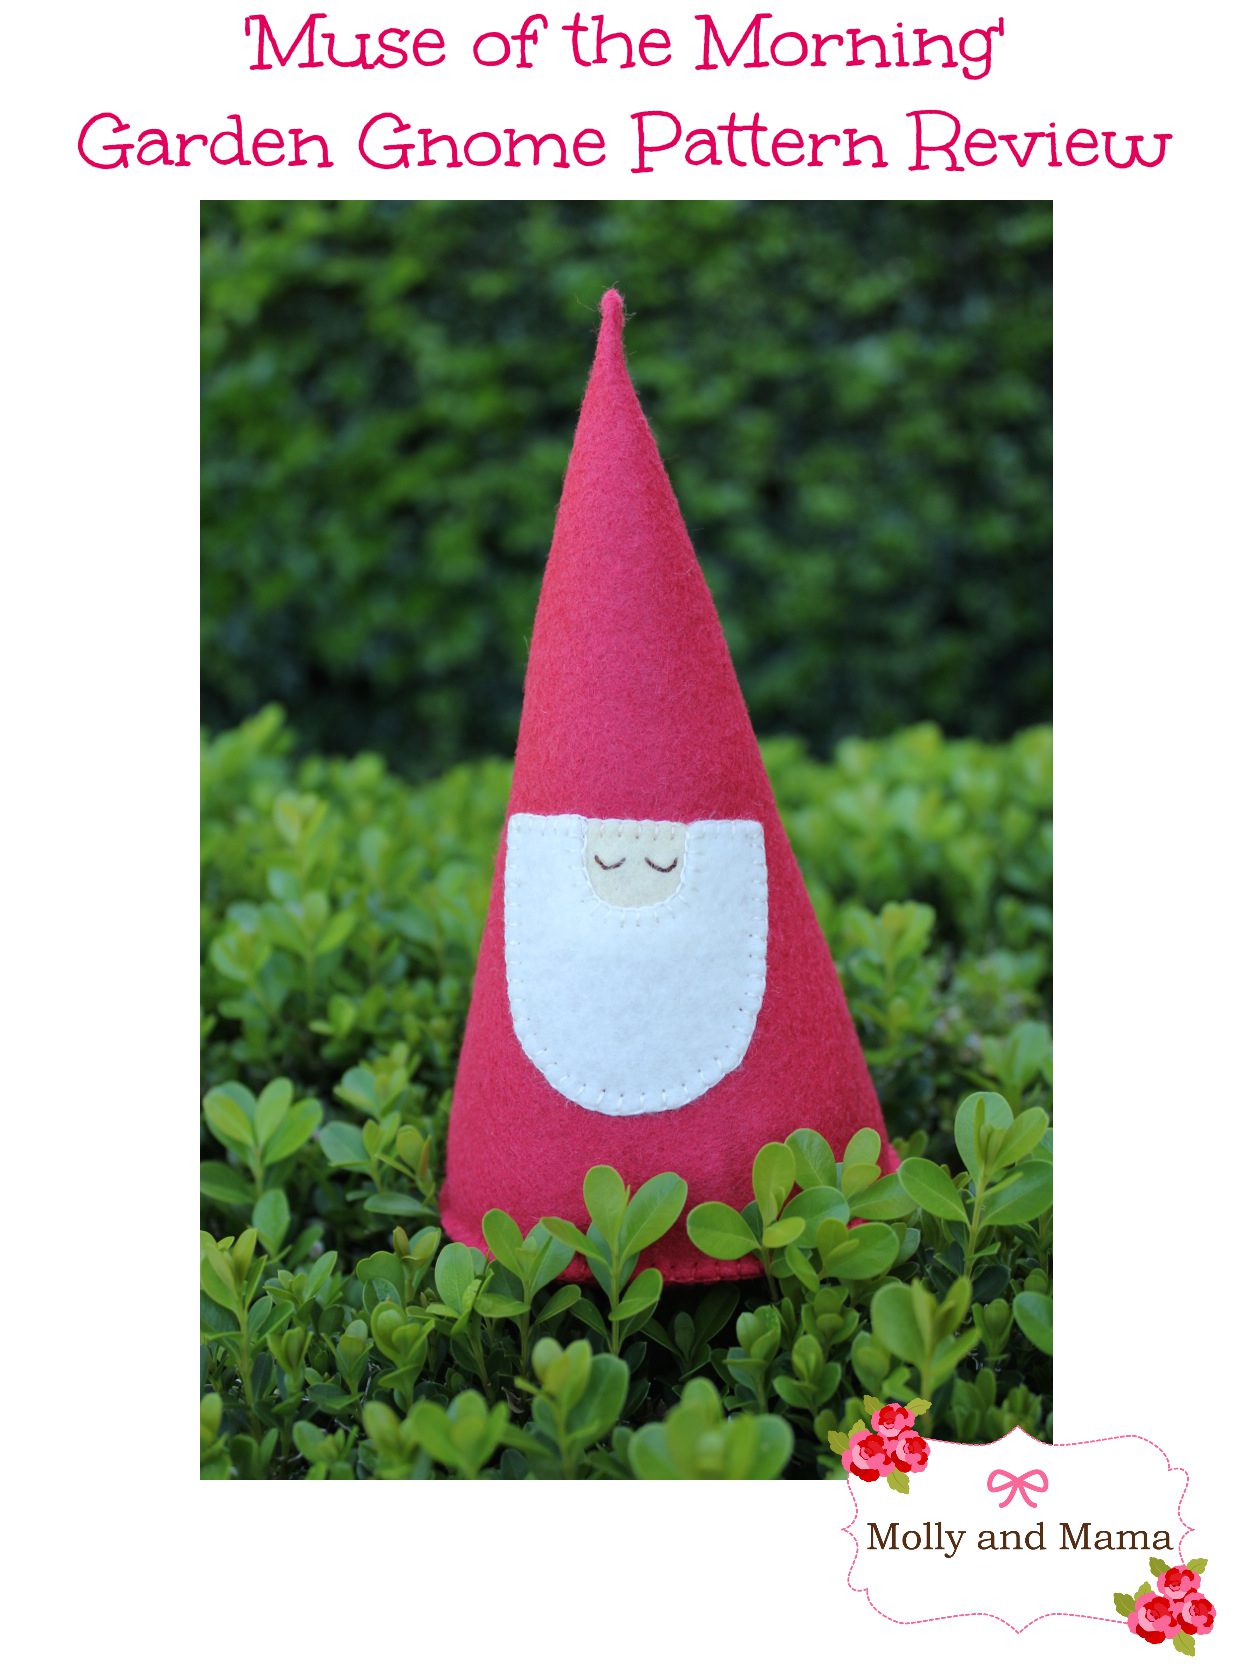 ‘Muse of the Morning’ Garden Gnome Pattern Review